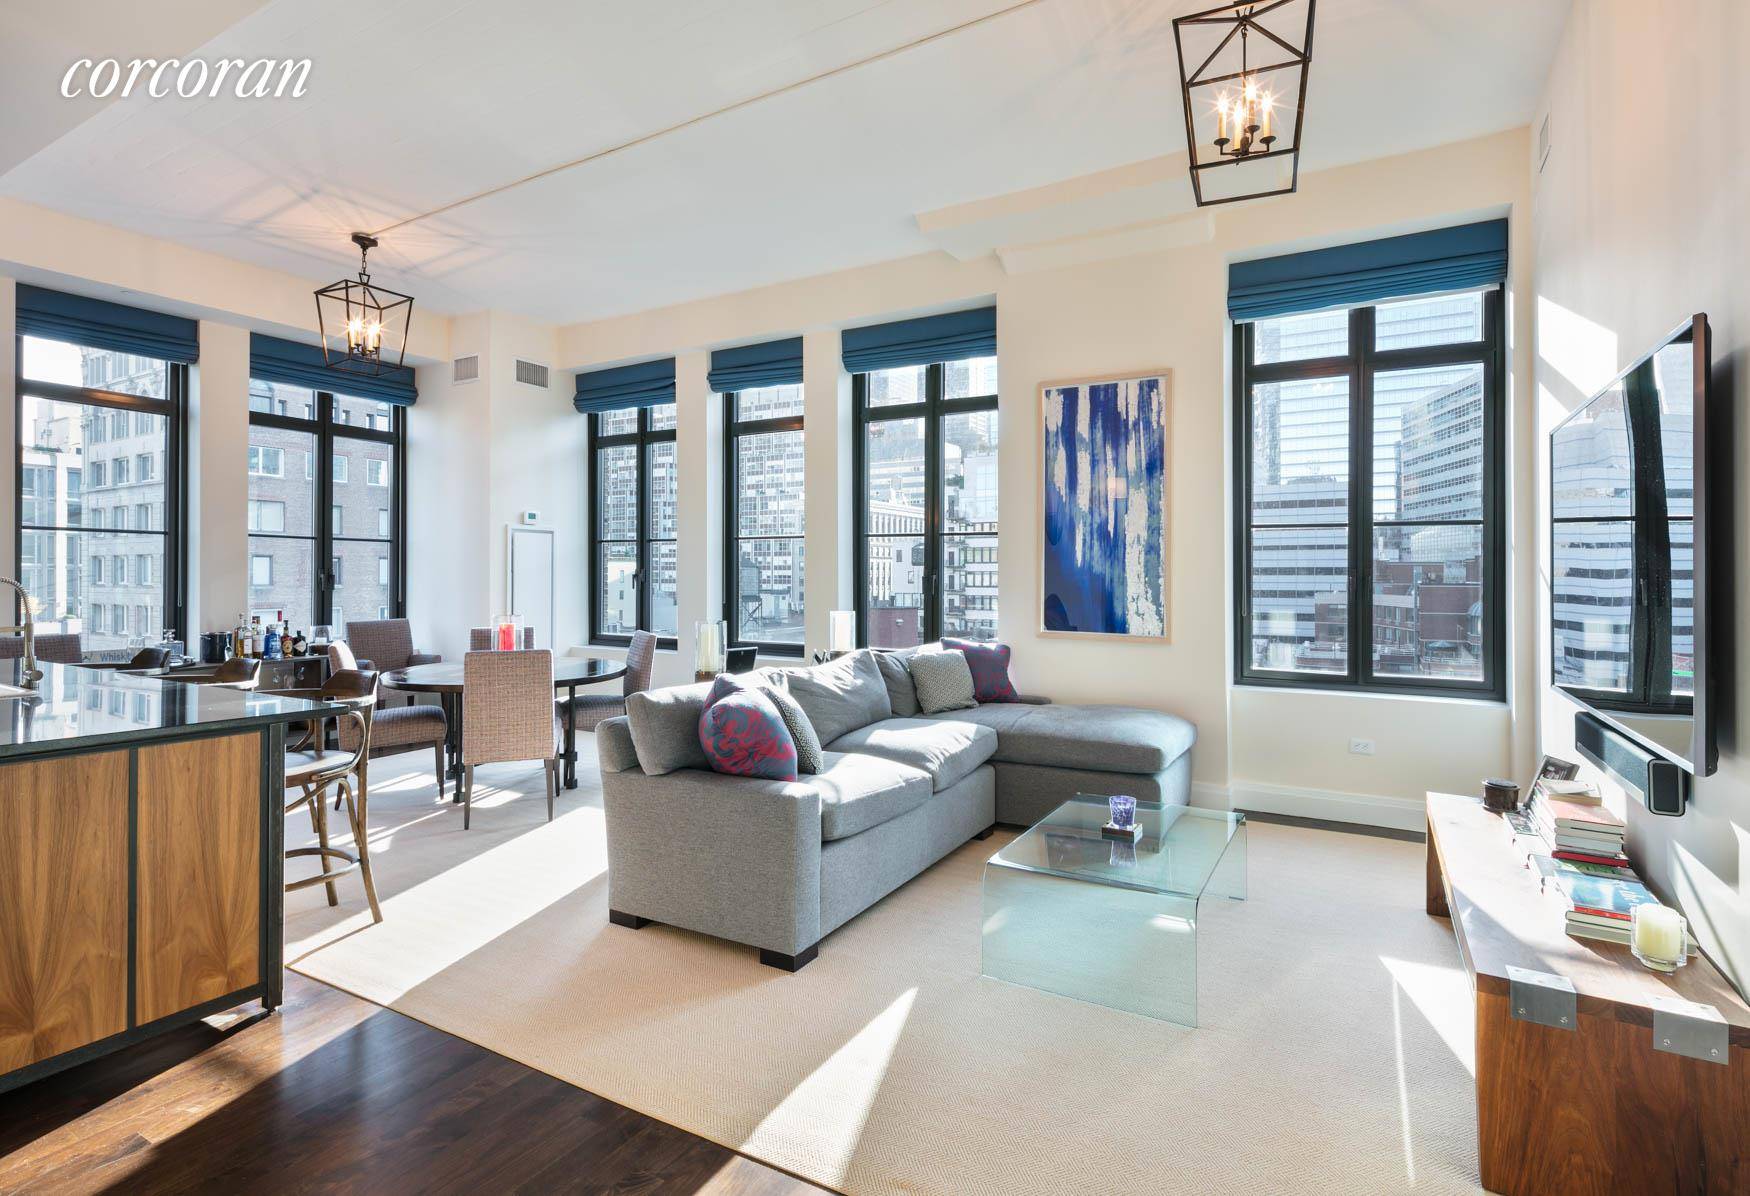 Enjoy sun filled loft living in this flawless showplace featuring three bedrooms, and two and a half bathrooms in a prized, full service Tribeca condominium building.